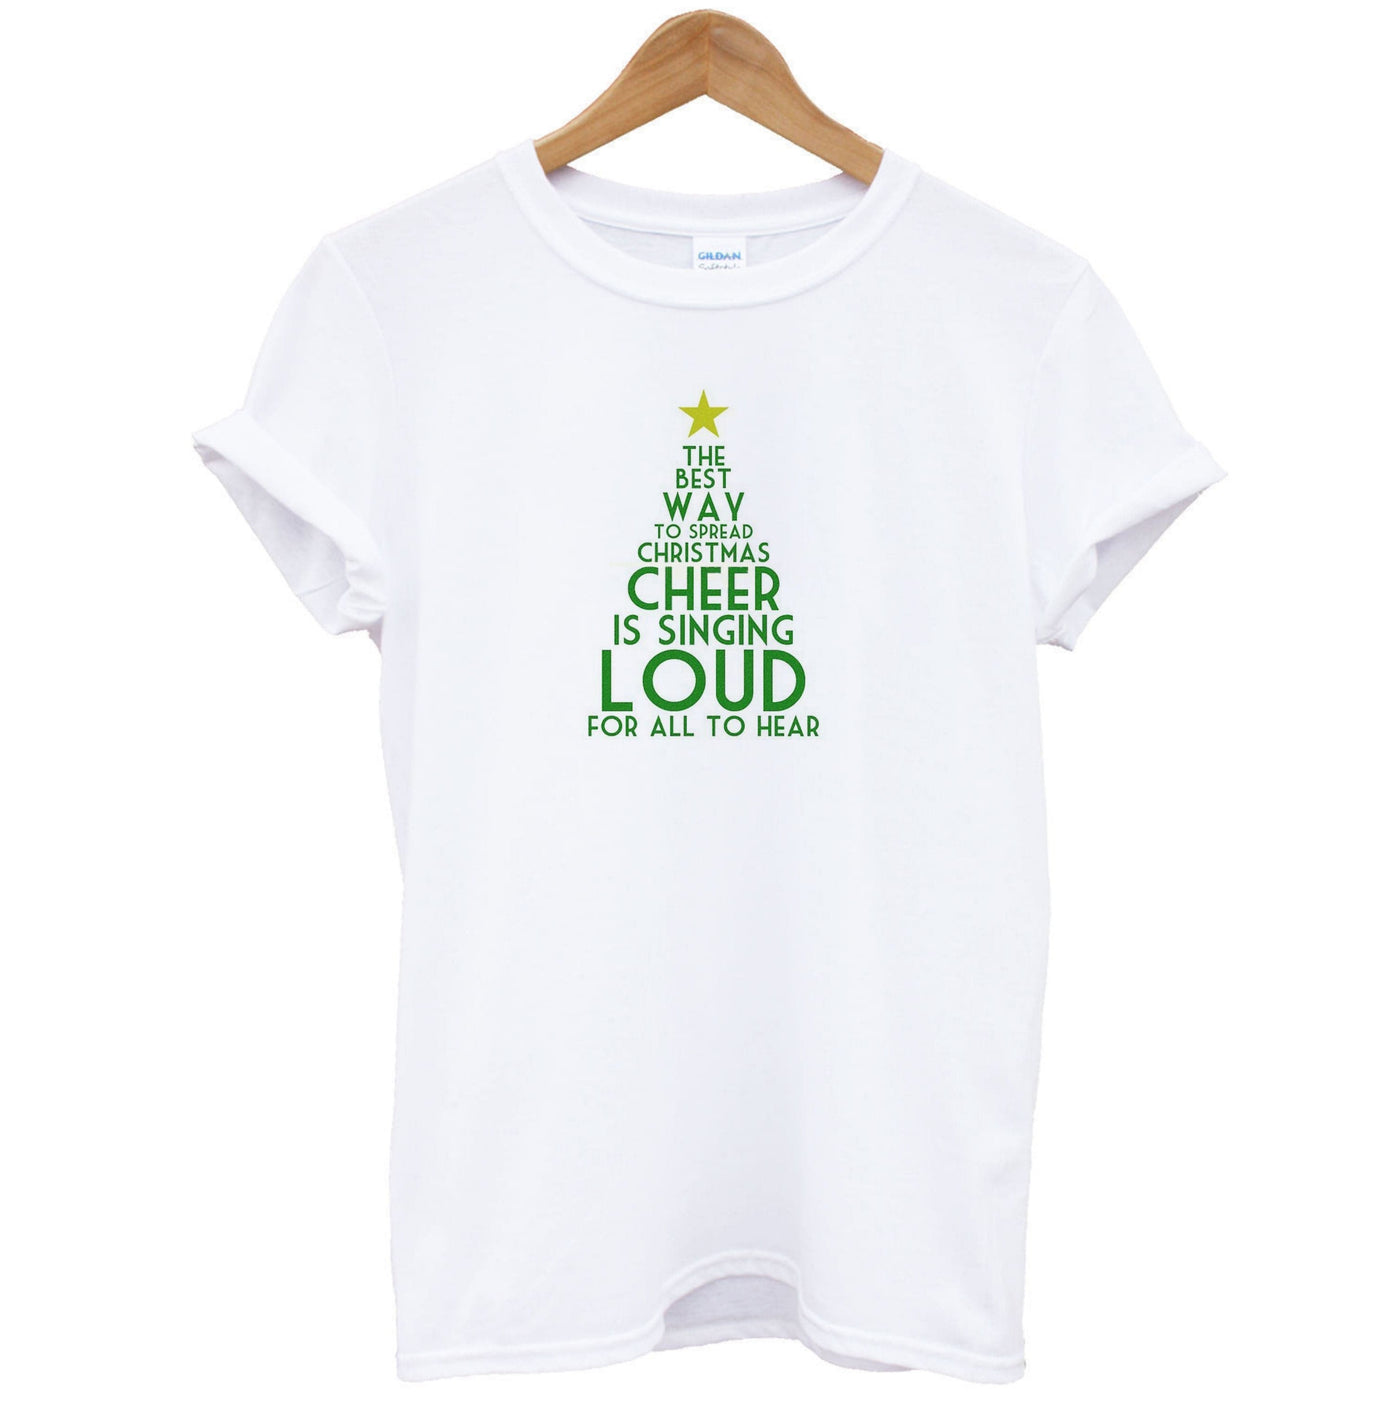 The Best Way To Spread Christmas Cheer - Elf T-Shirt